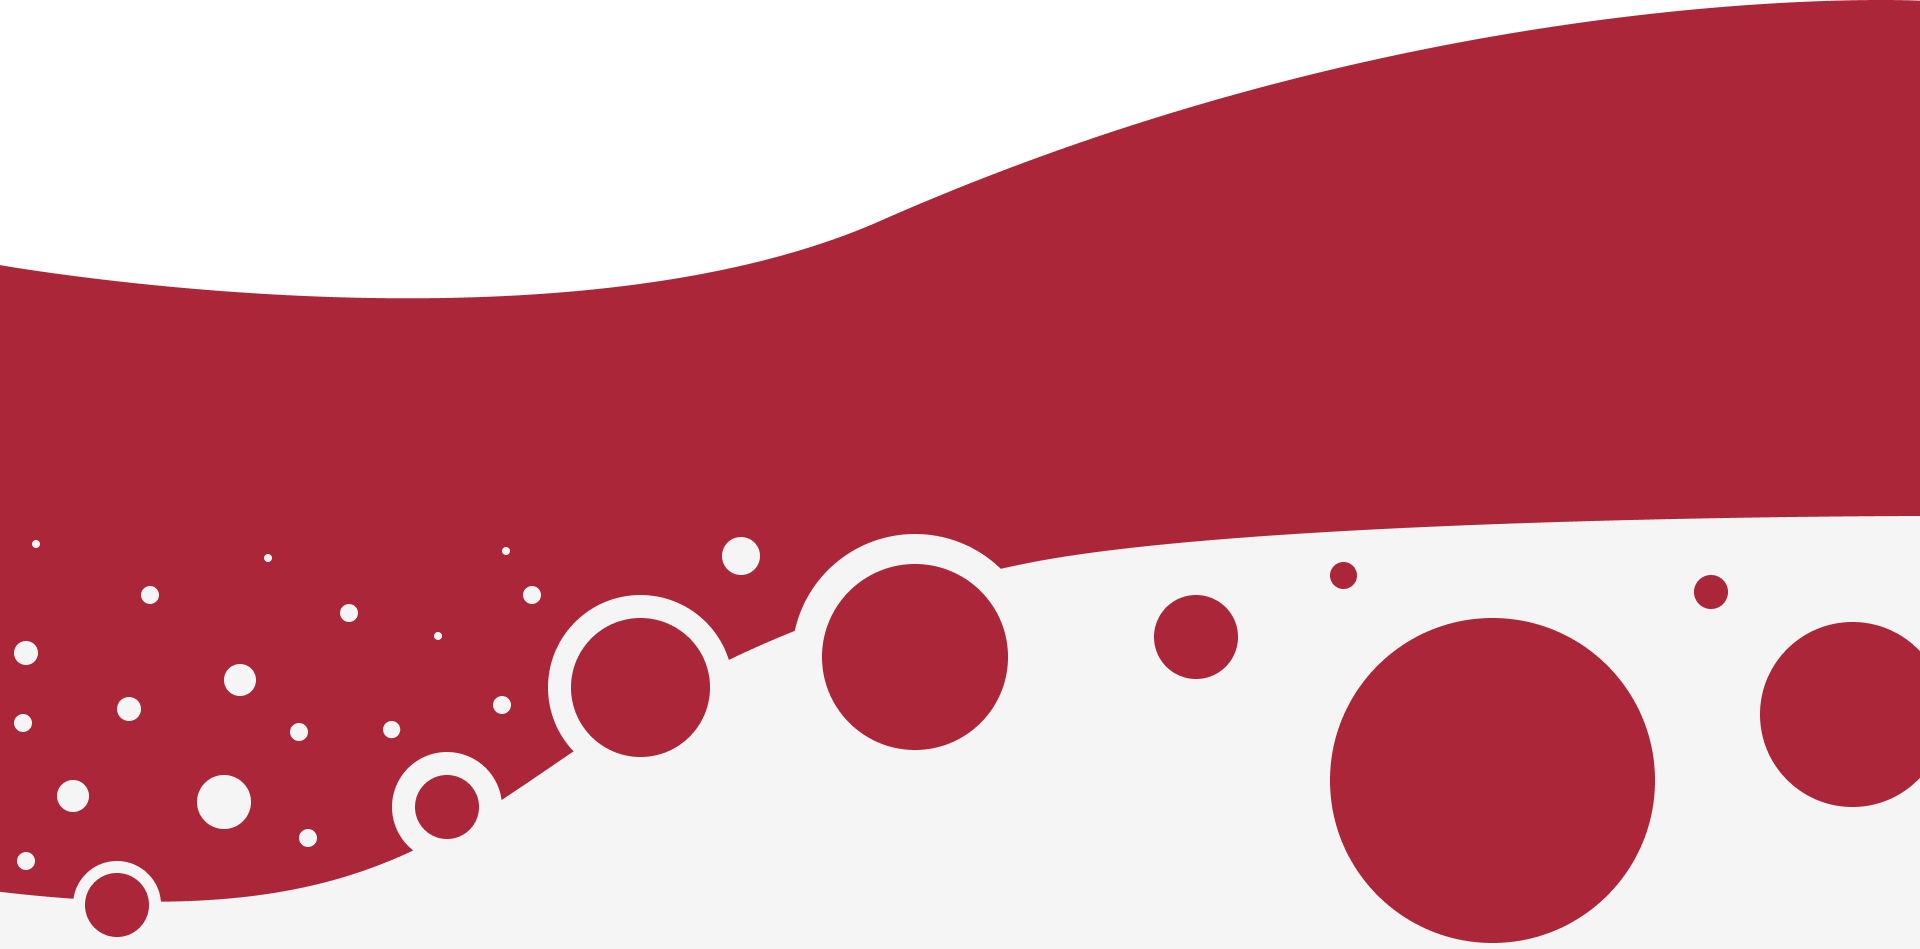 Red vector image